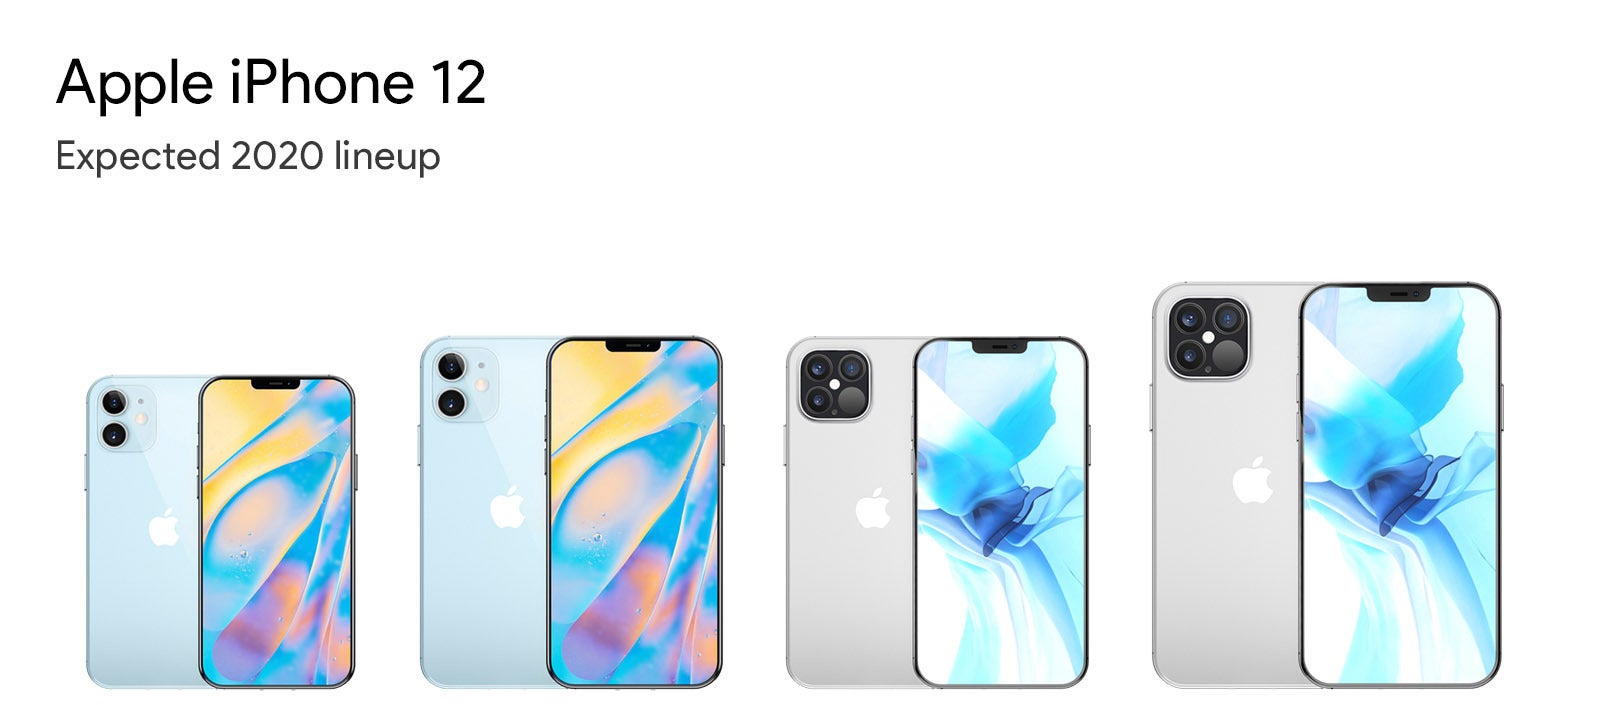 Apple iPhone 12 mini, iPhone 12, 12 Pro, and 12 Pro Max models - When and how to watch the 2020 Apple iPhone 12 5G October event live stream